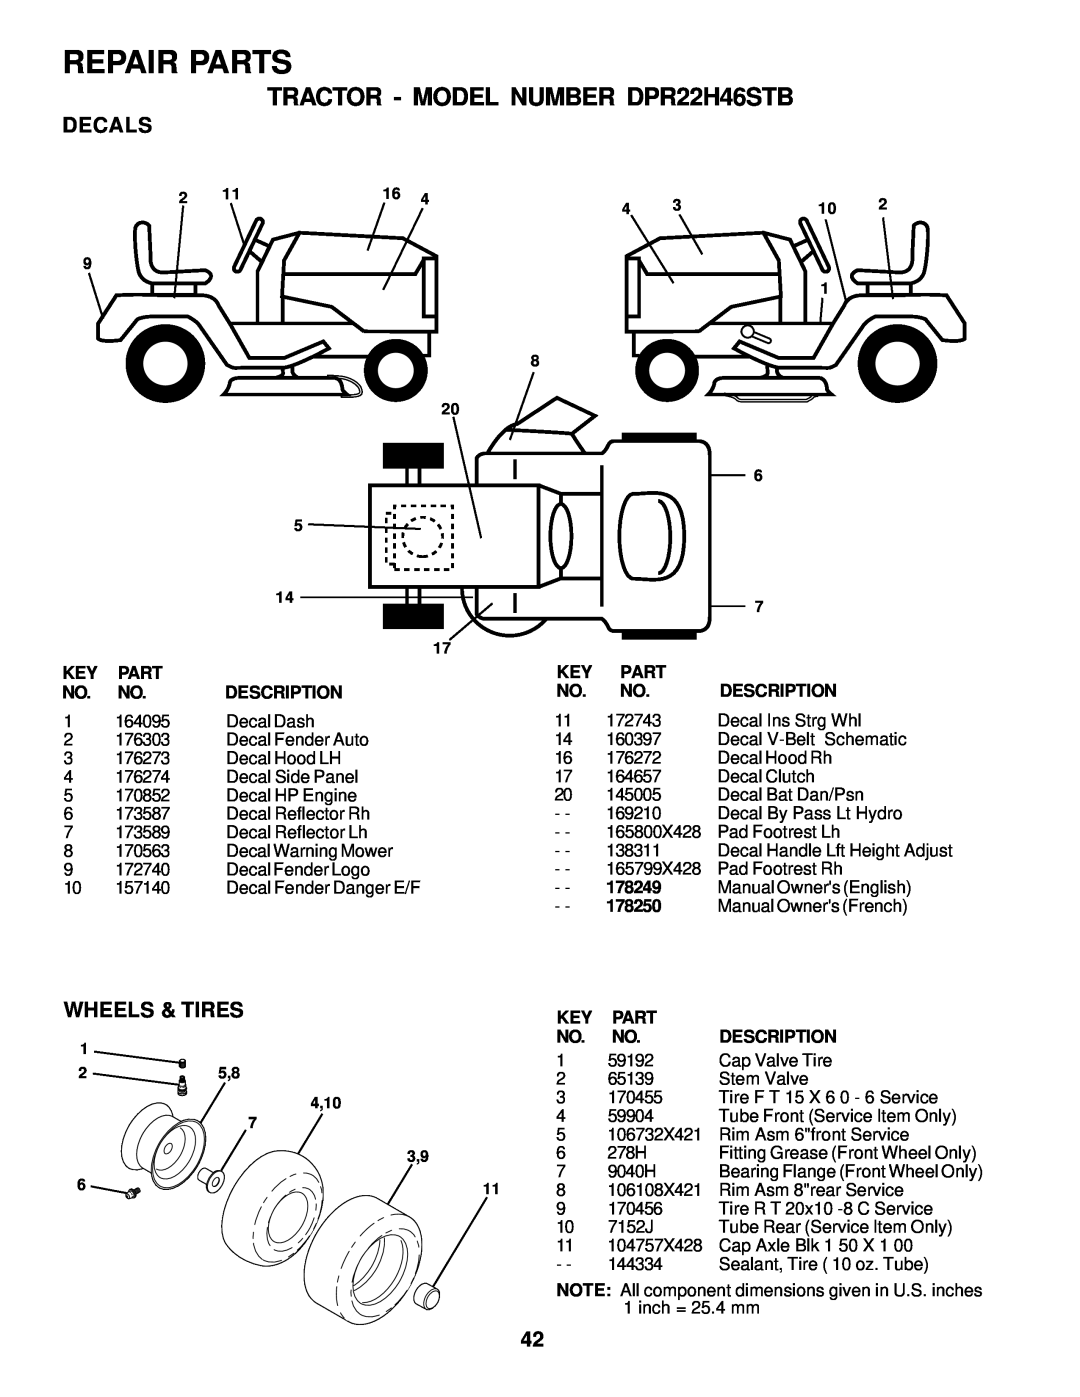 Poulan 178249 owner manual Decals, Wheels & Tires, Repair Parts, TRACTOR - MODEL NUMBER DPR22H46STB, 25,8 4,10 